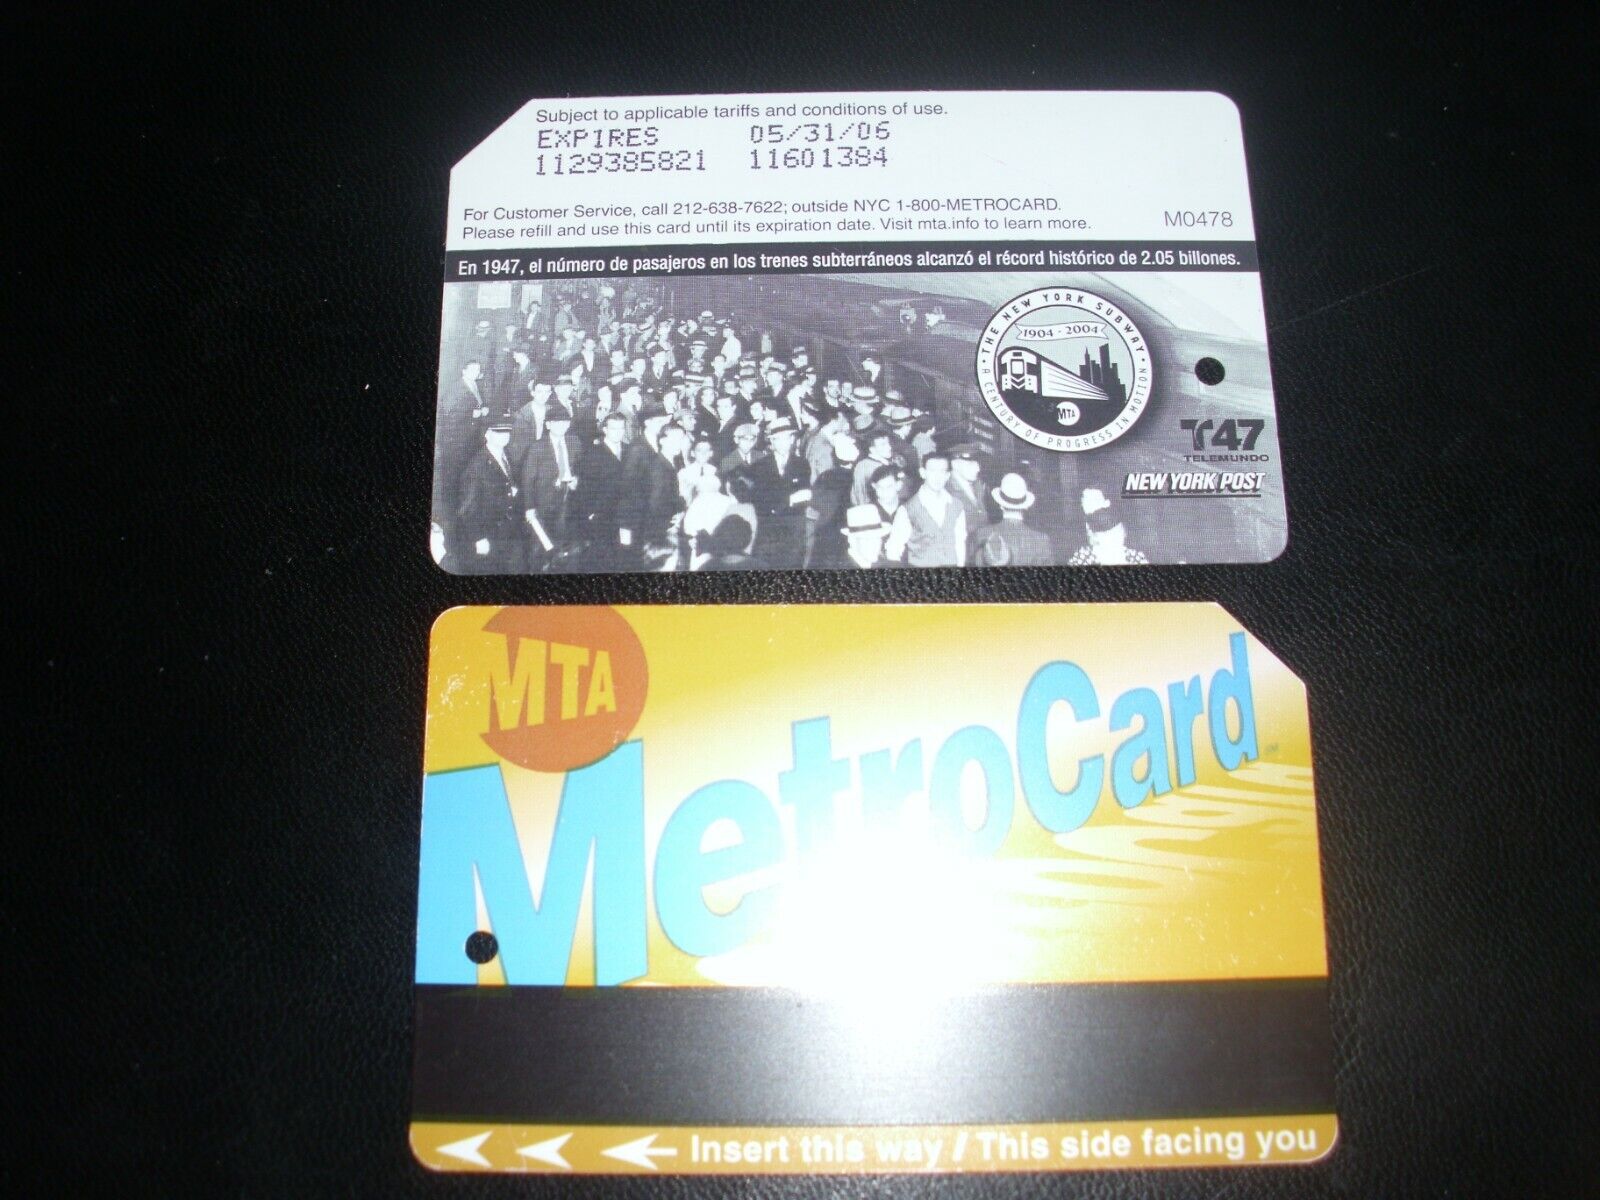  2005 HISTORICAL RECORD  METROCARD Metro Card Expired 2006 T47, NEW YORK POST